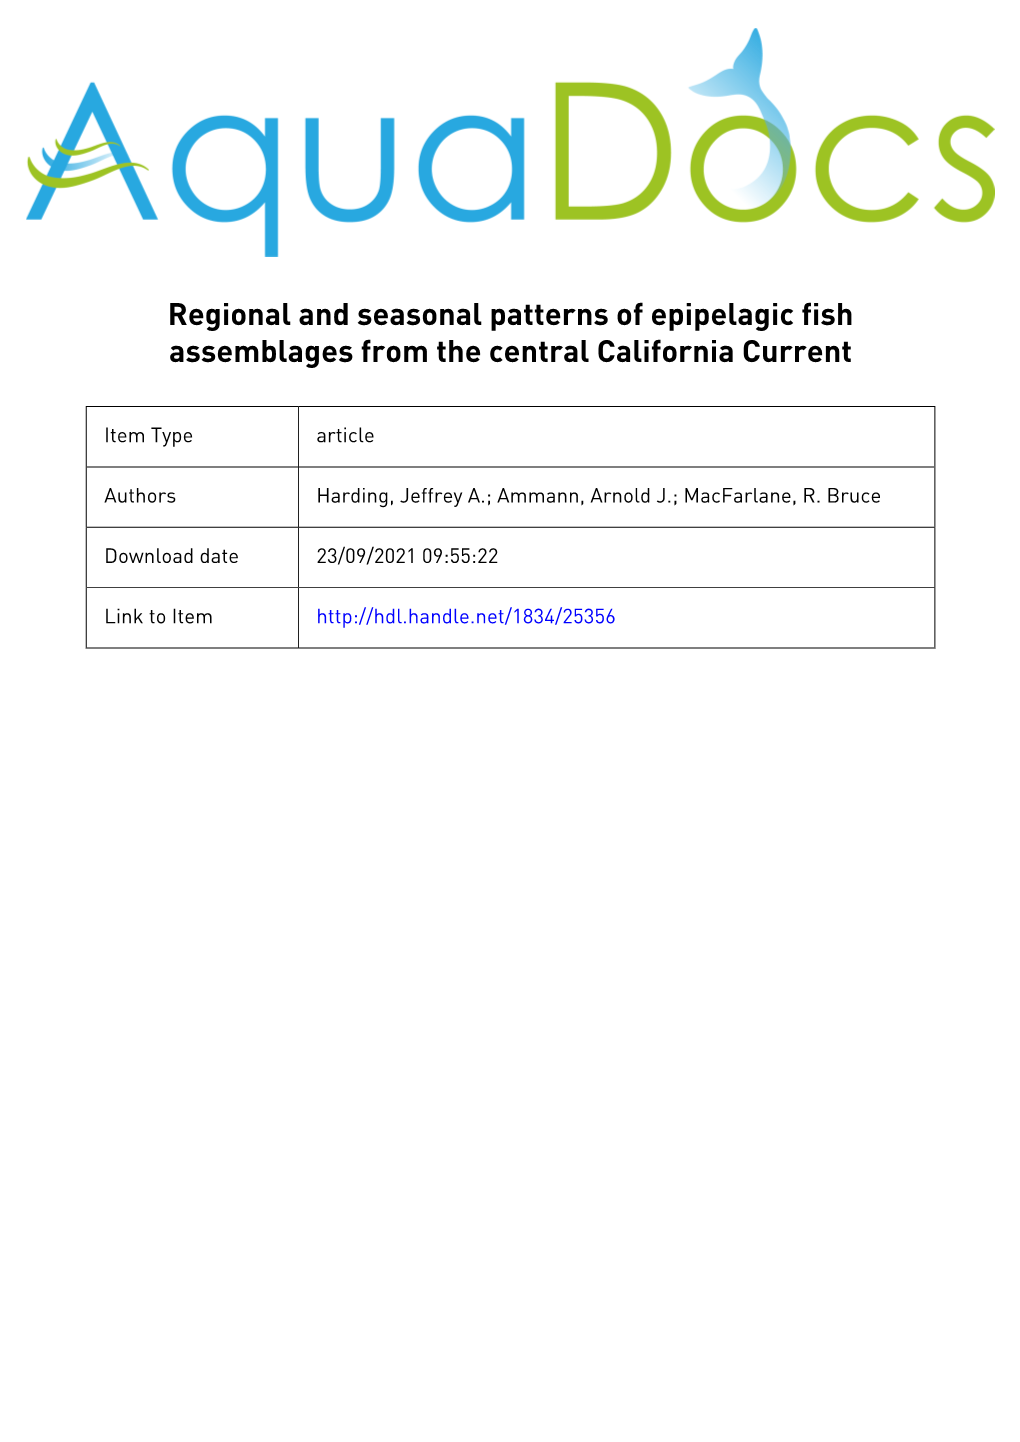 Regional and Seasonal Patterns of Epipelagic Fish Assemblages from the Central California Current